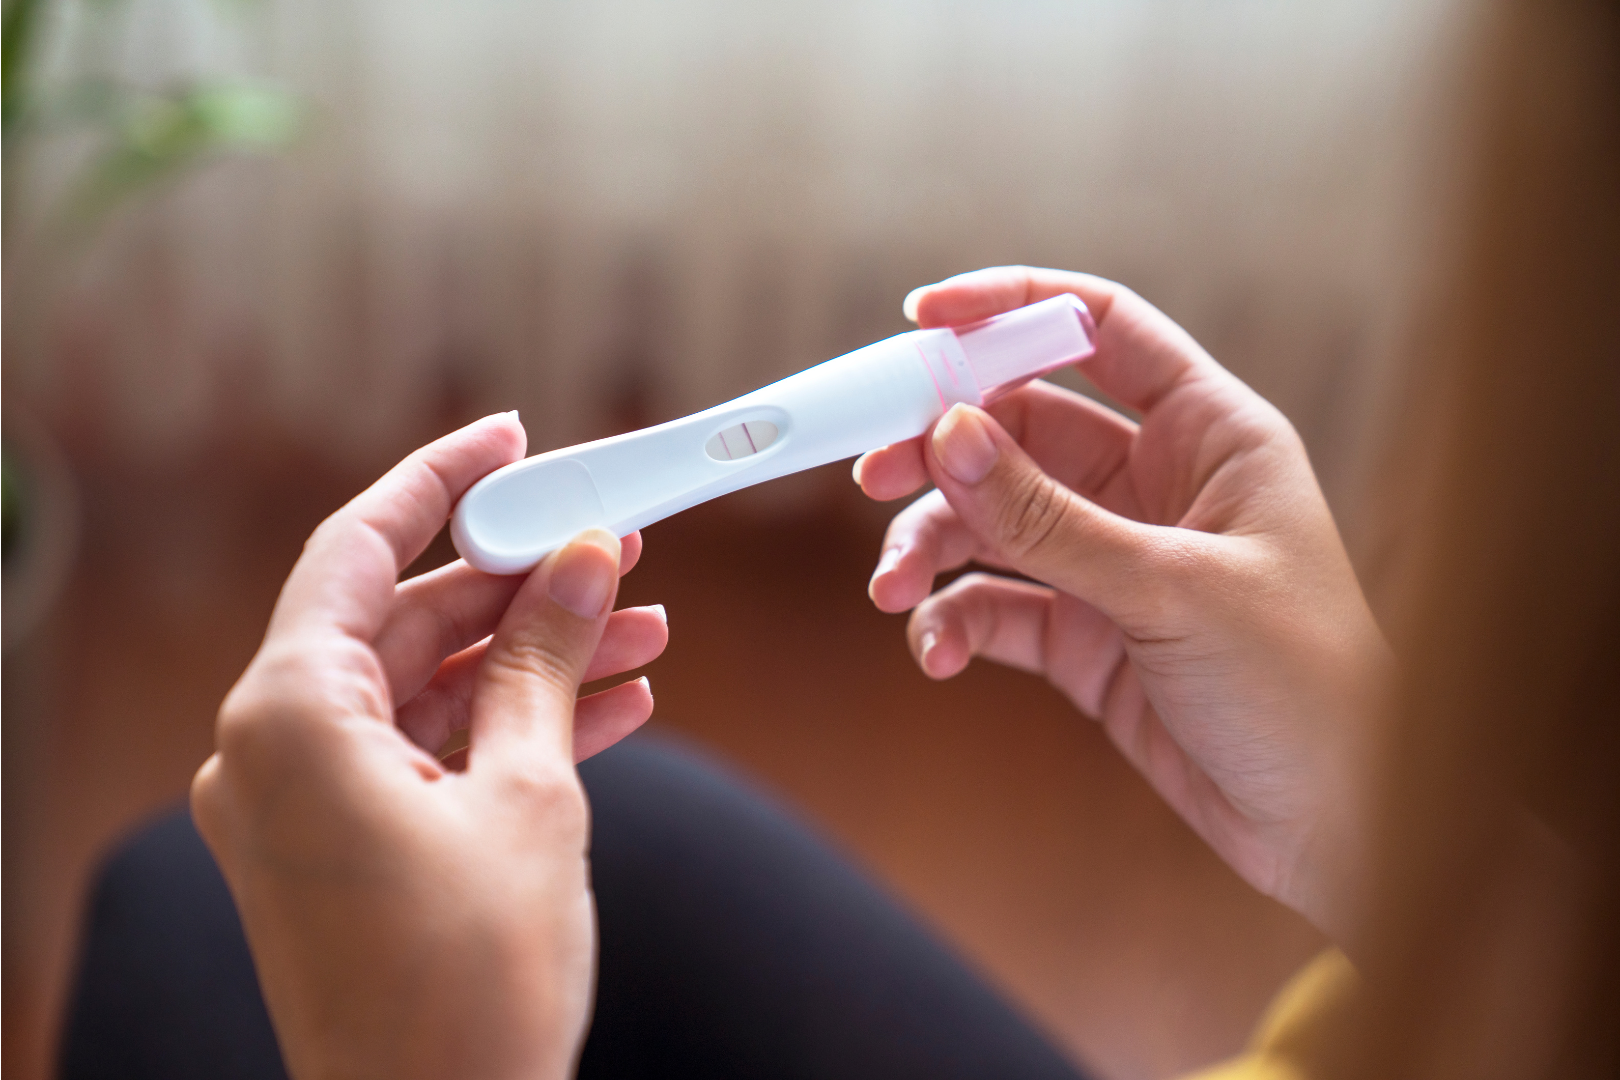 Image of hands holding a positive pregnancy test.